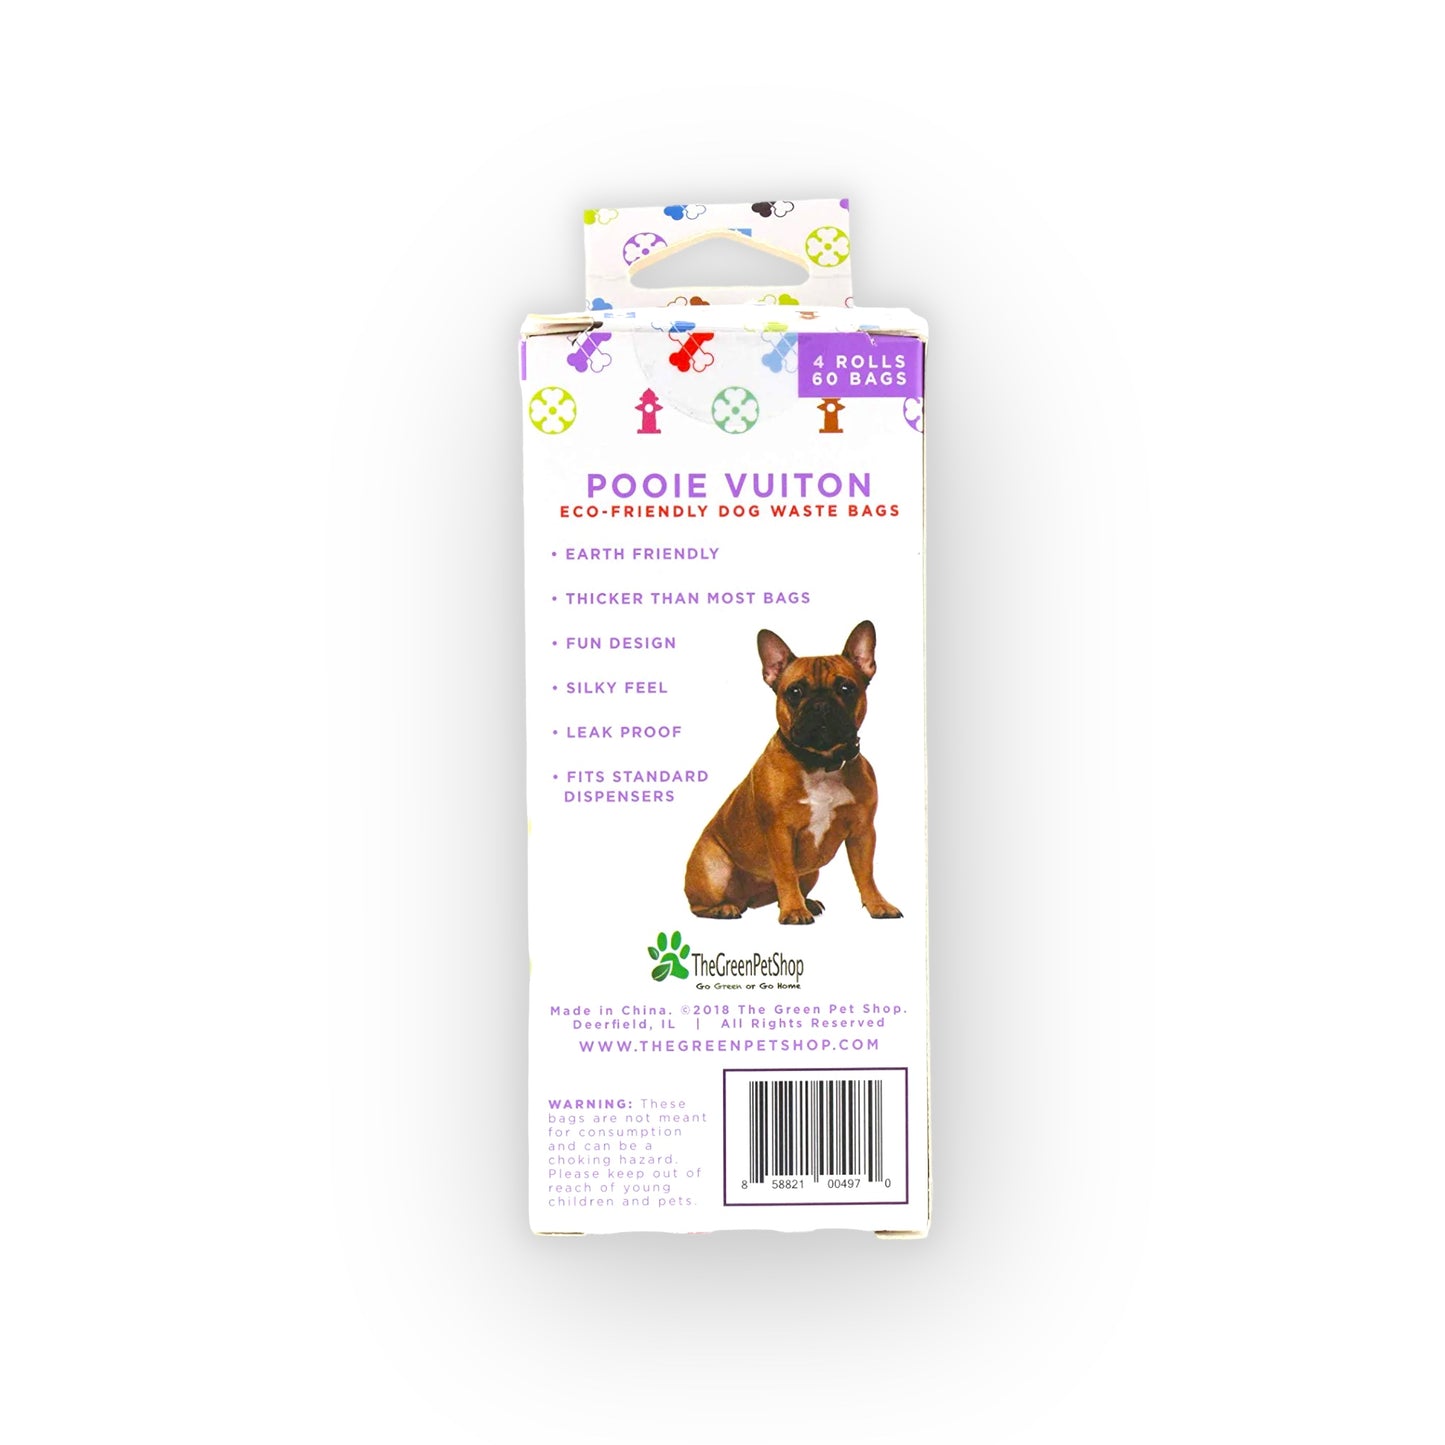 Pooie Vuiton Dog Waste Bags - 8 Pack - 120 Bags